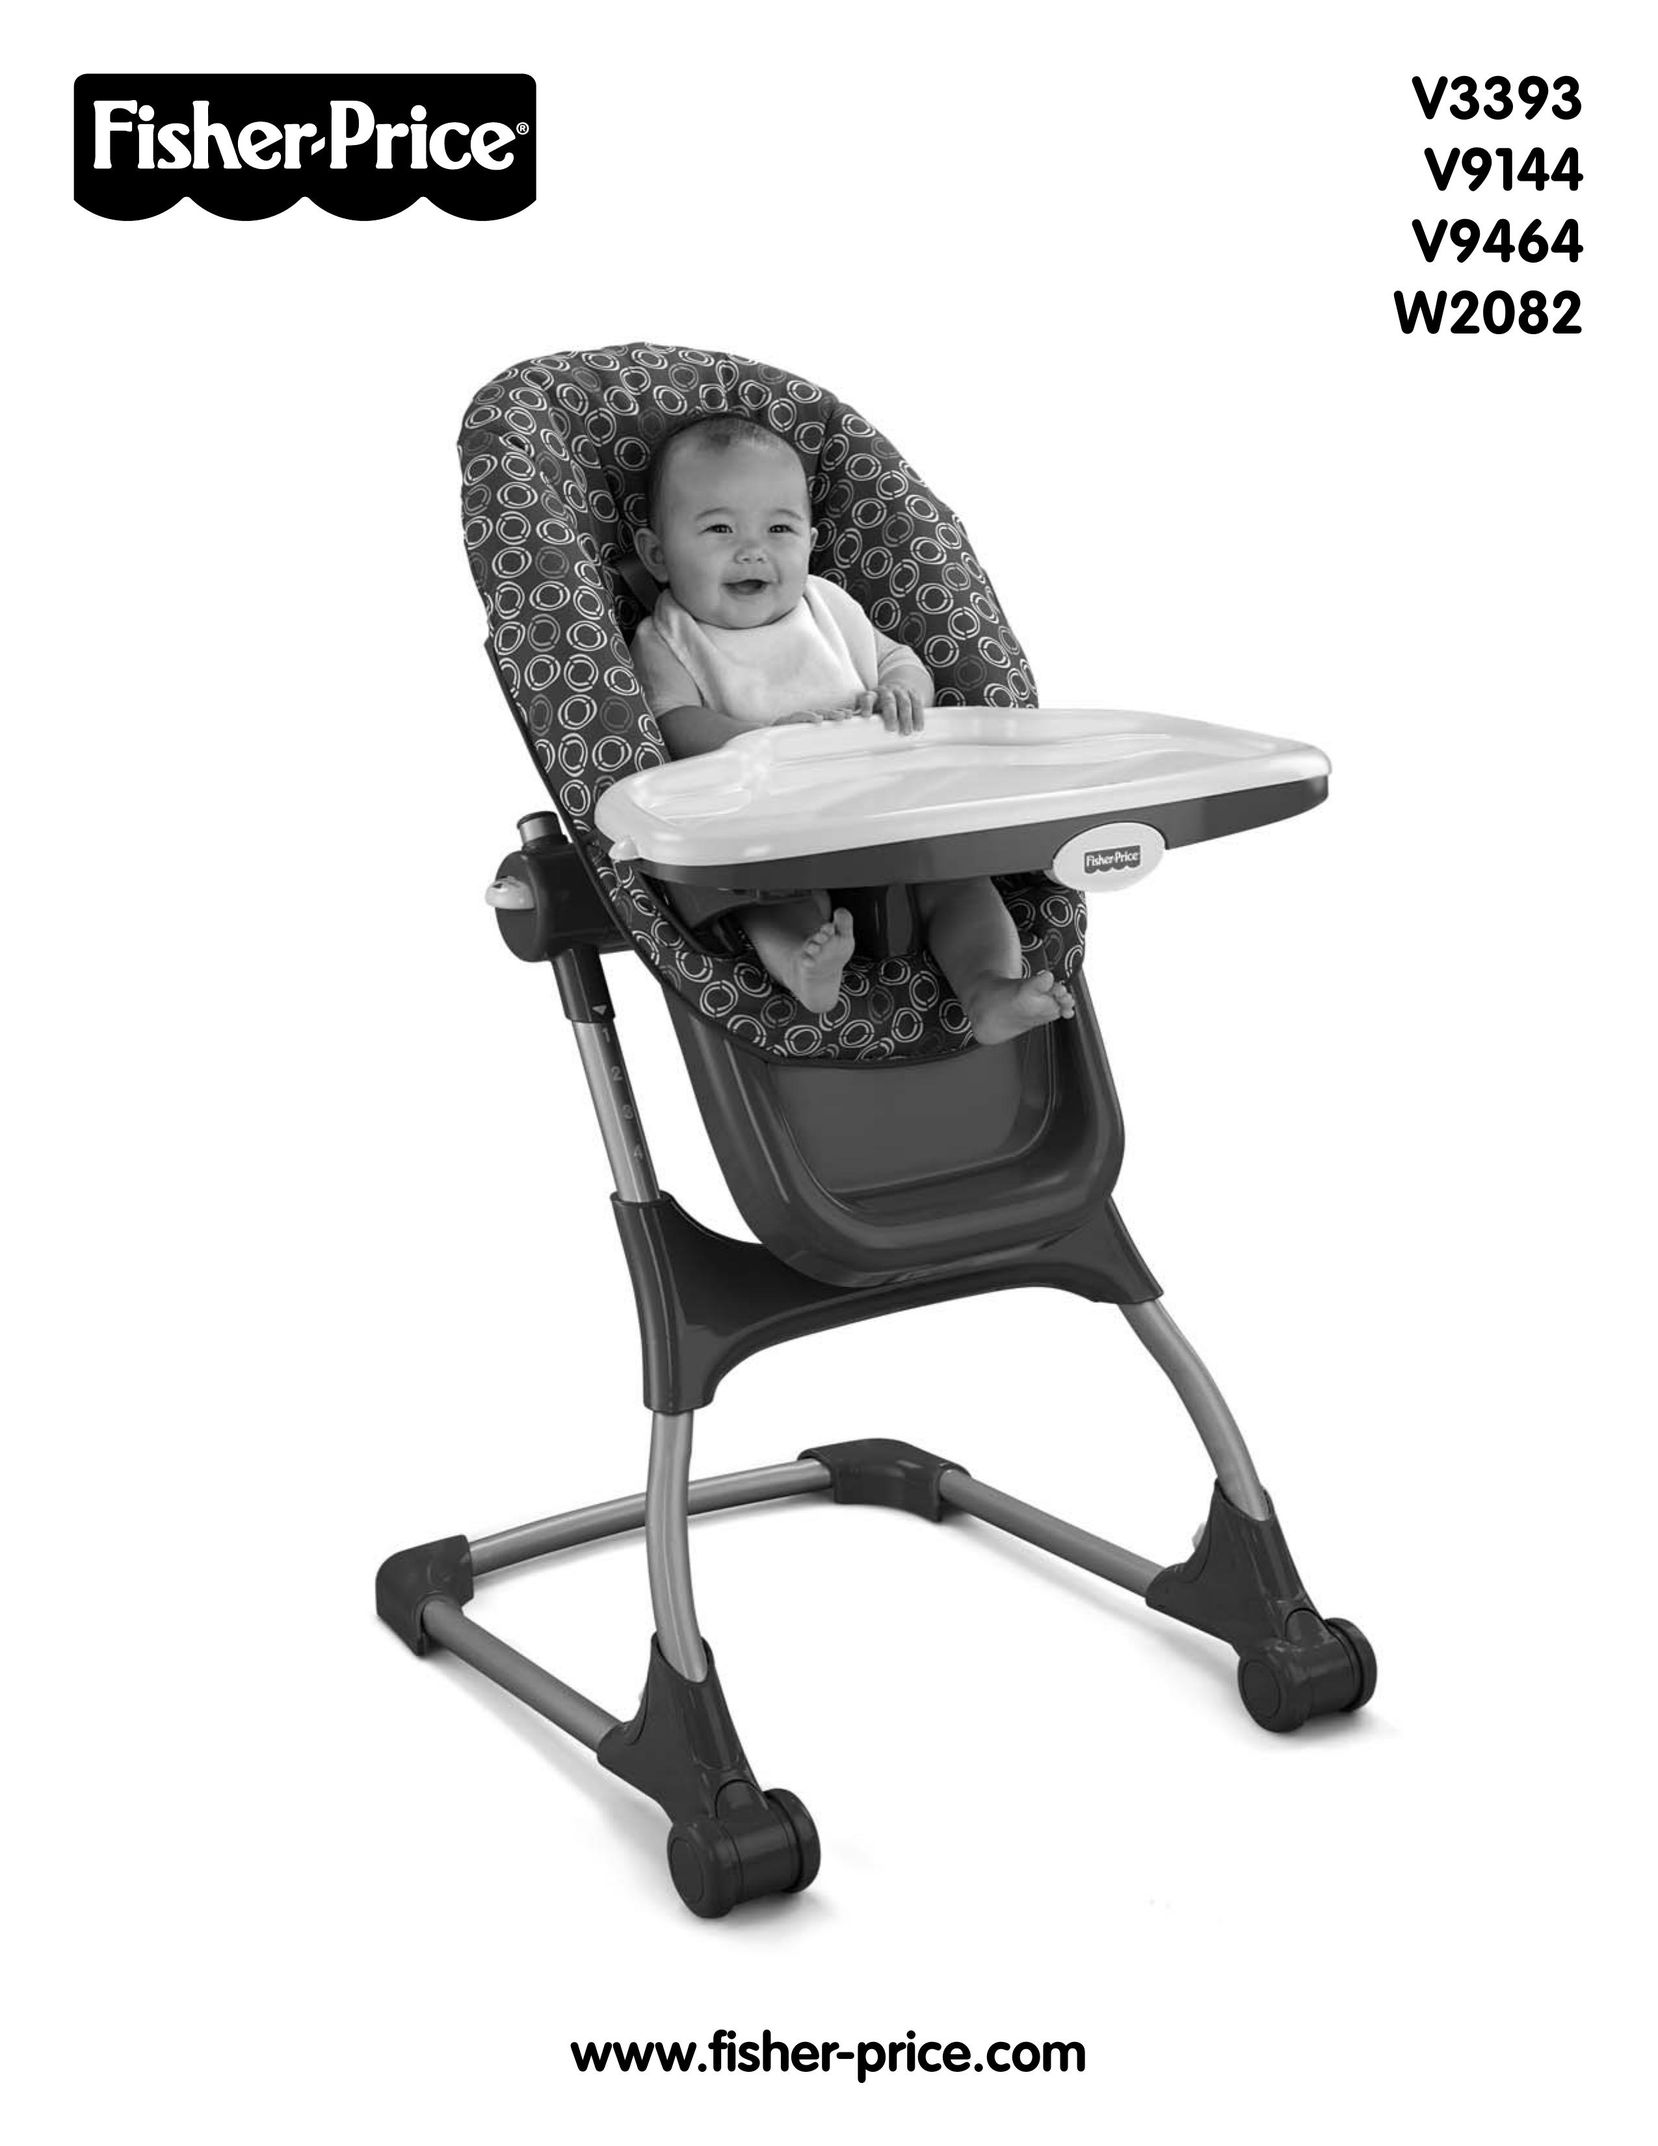 Fisher-Price V9144 High Chair User Manual